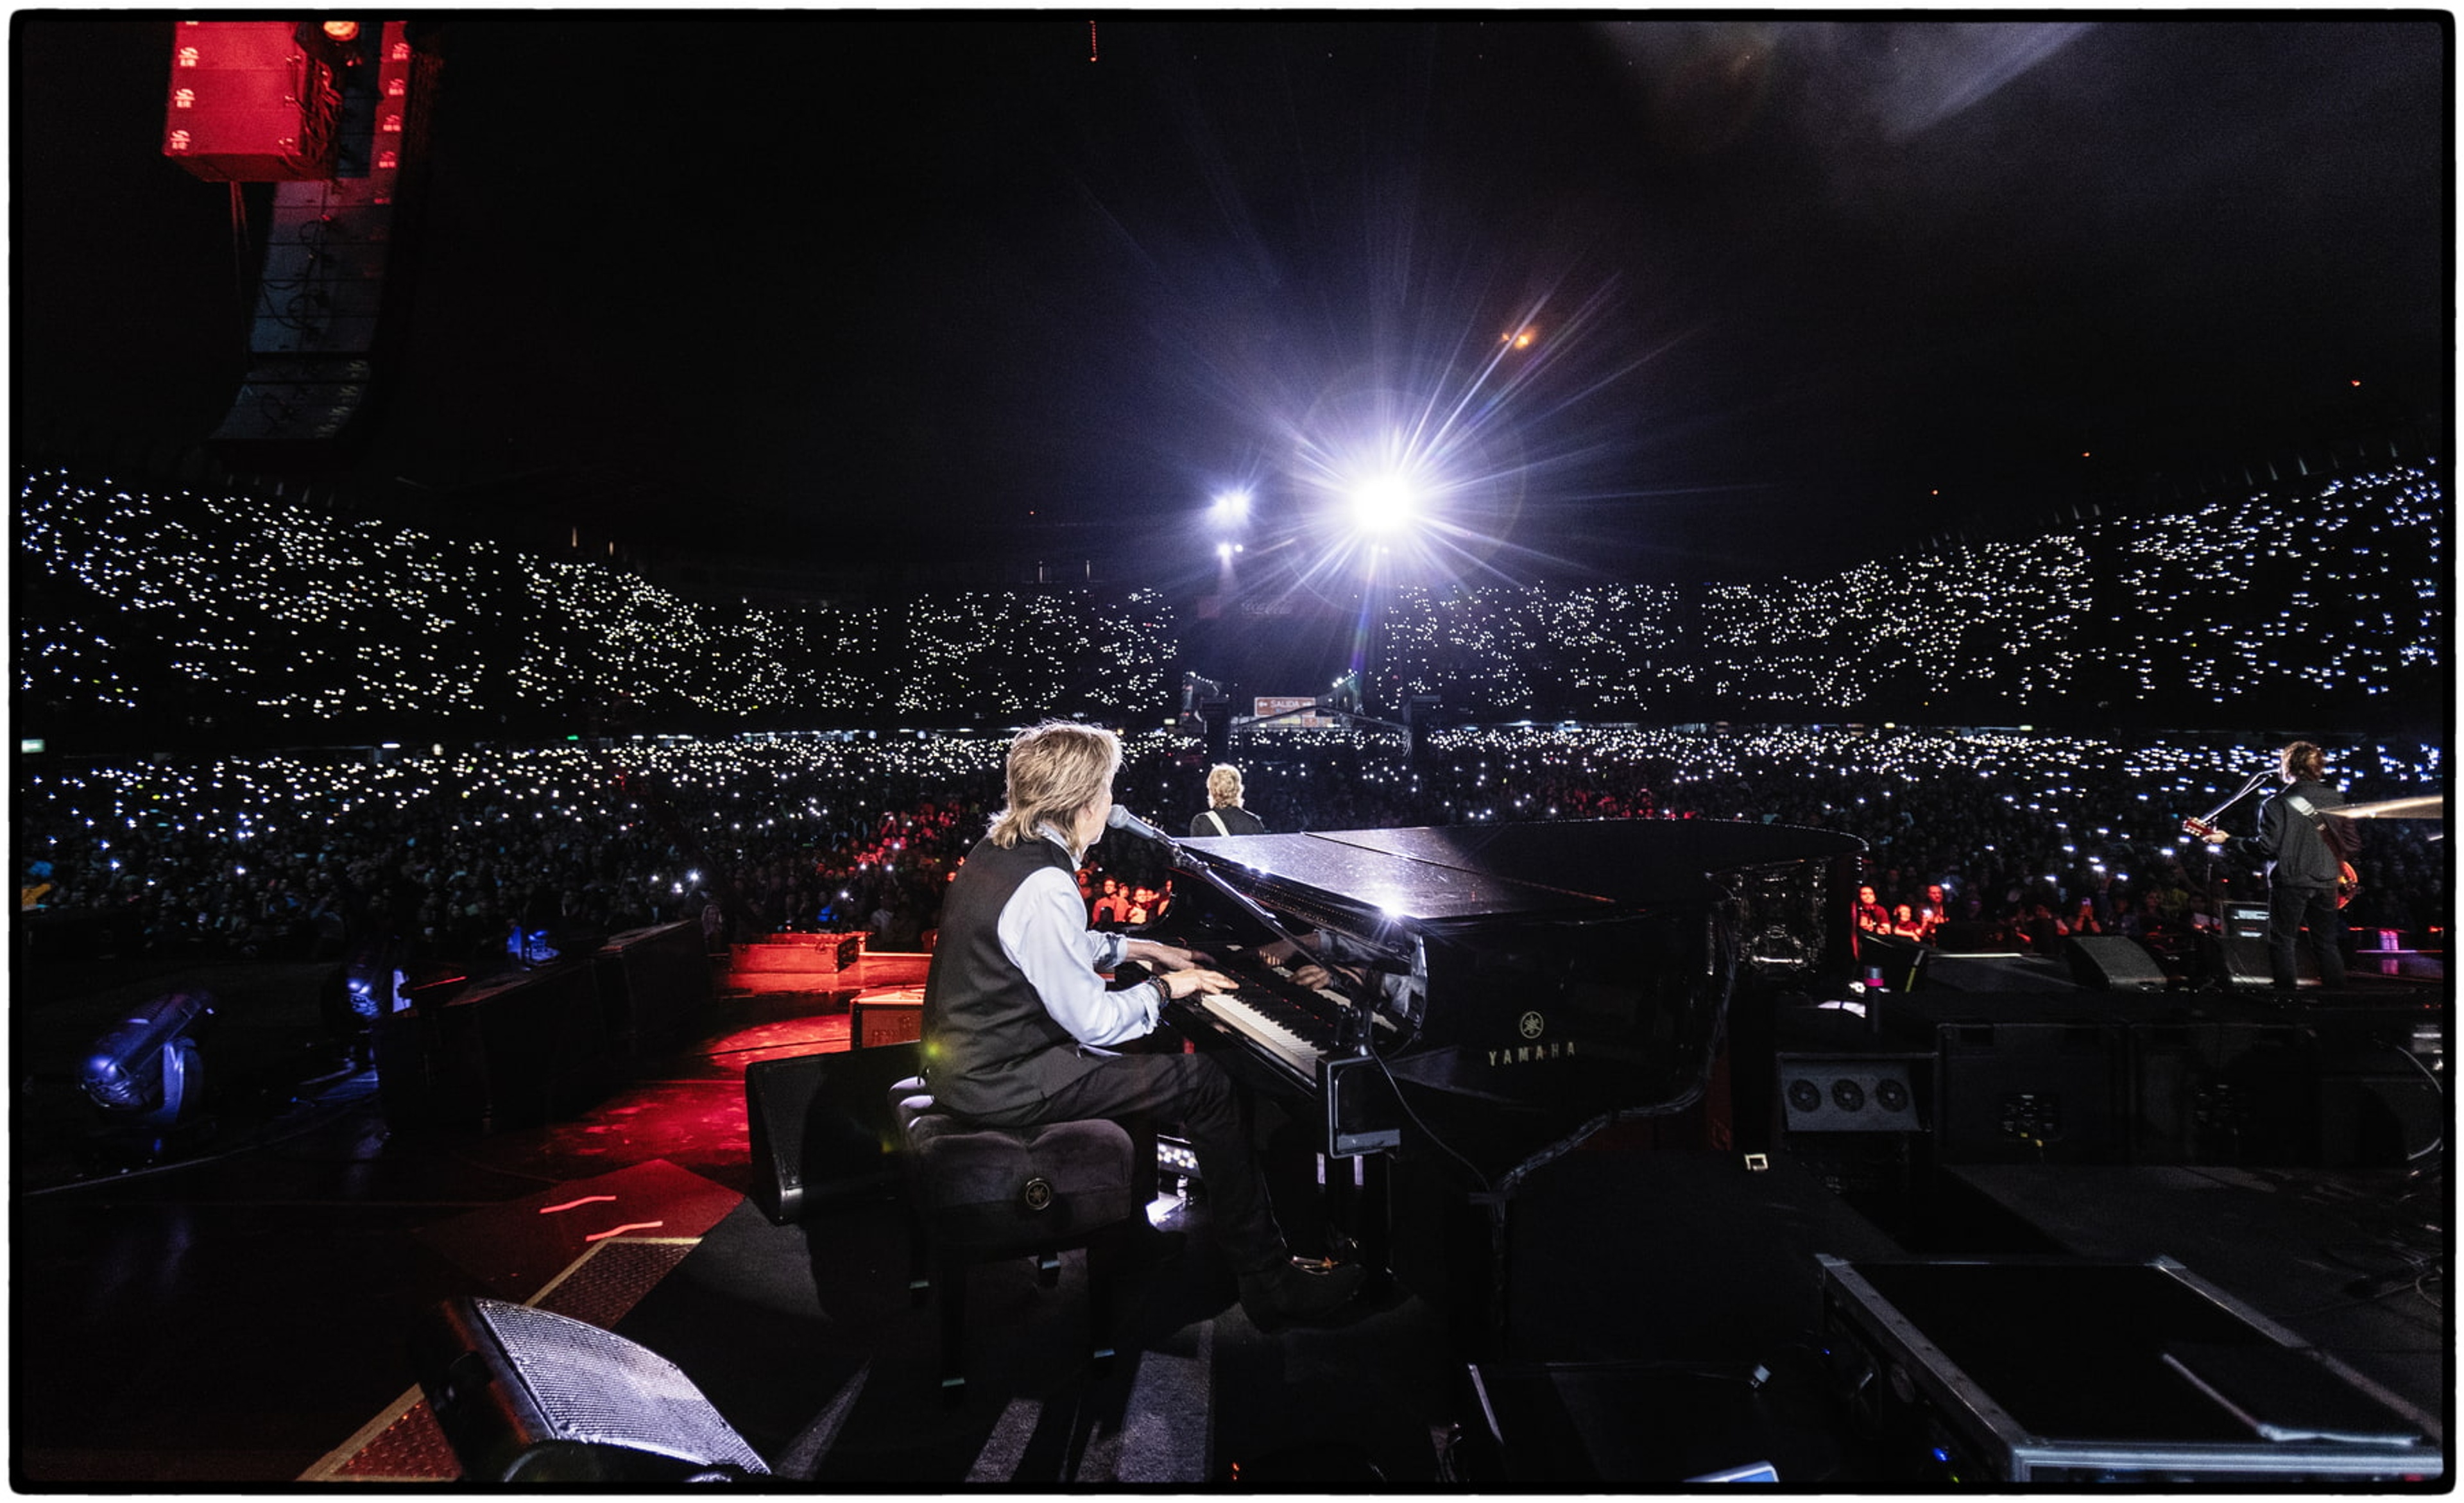 Photograph of Paul at the piano with he crowd behind him whilst he performs at Foro Sol in Mexico city.